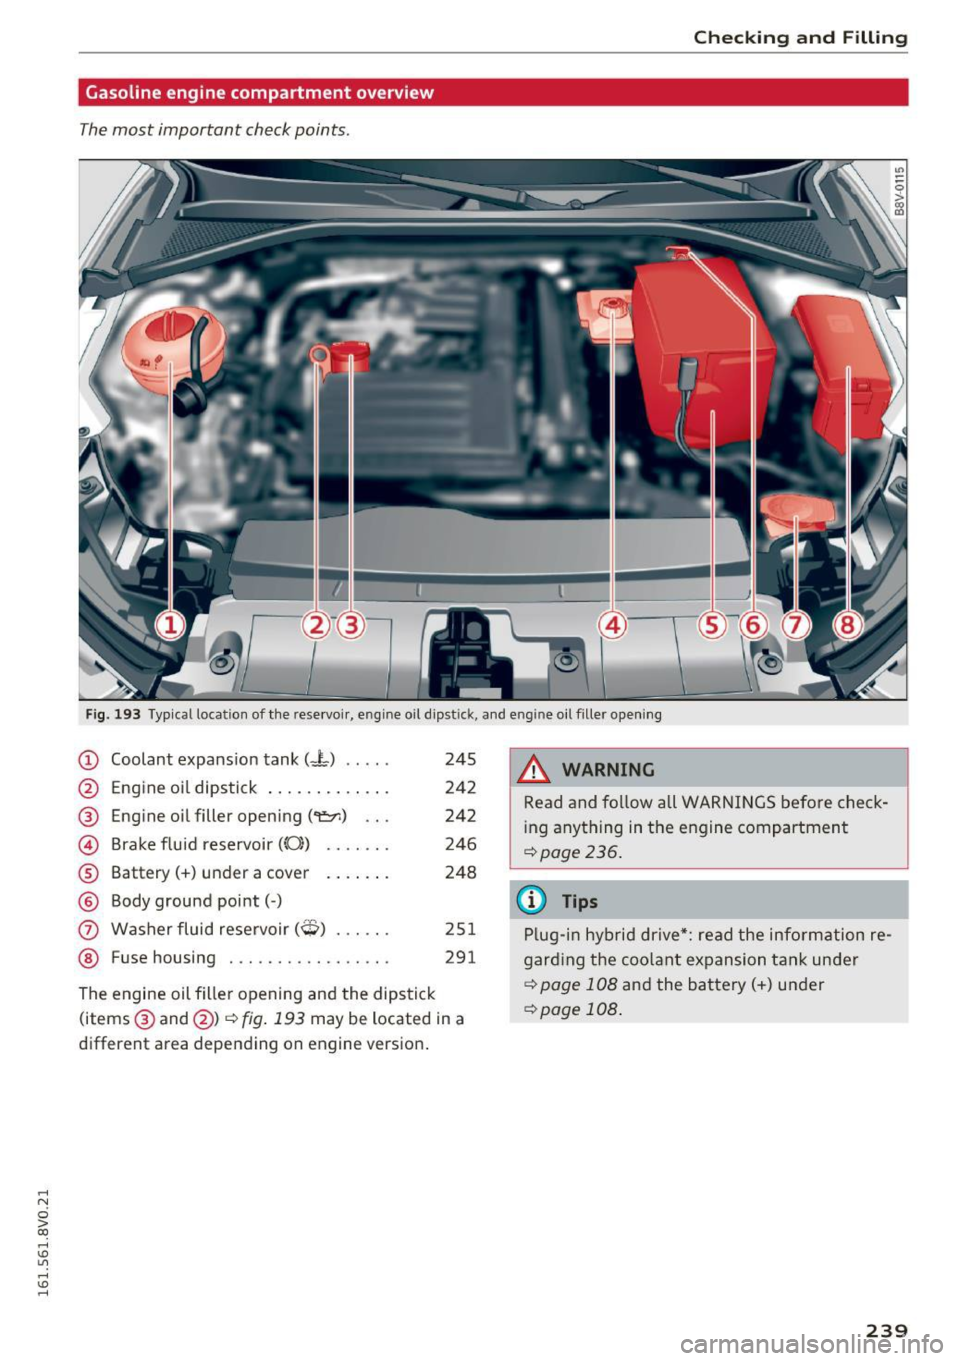 AUDI A3 2016  Owner´s Manual .... N 
0 > CX) 
.... I.Cl U"I 
.... I.Cl .... 
Checking  and Filling 
Gasoline engine  compartment  overview 
The most  important  check points . 
Fig. 193 Typical location of  the  rese rvoir , engi